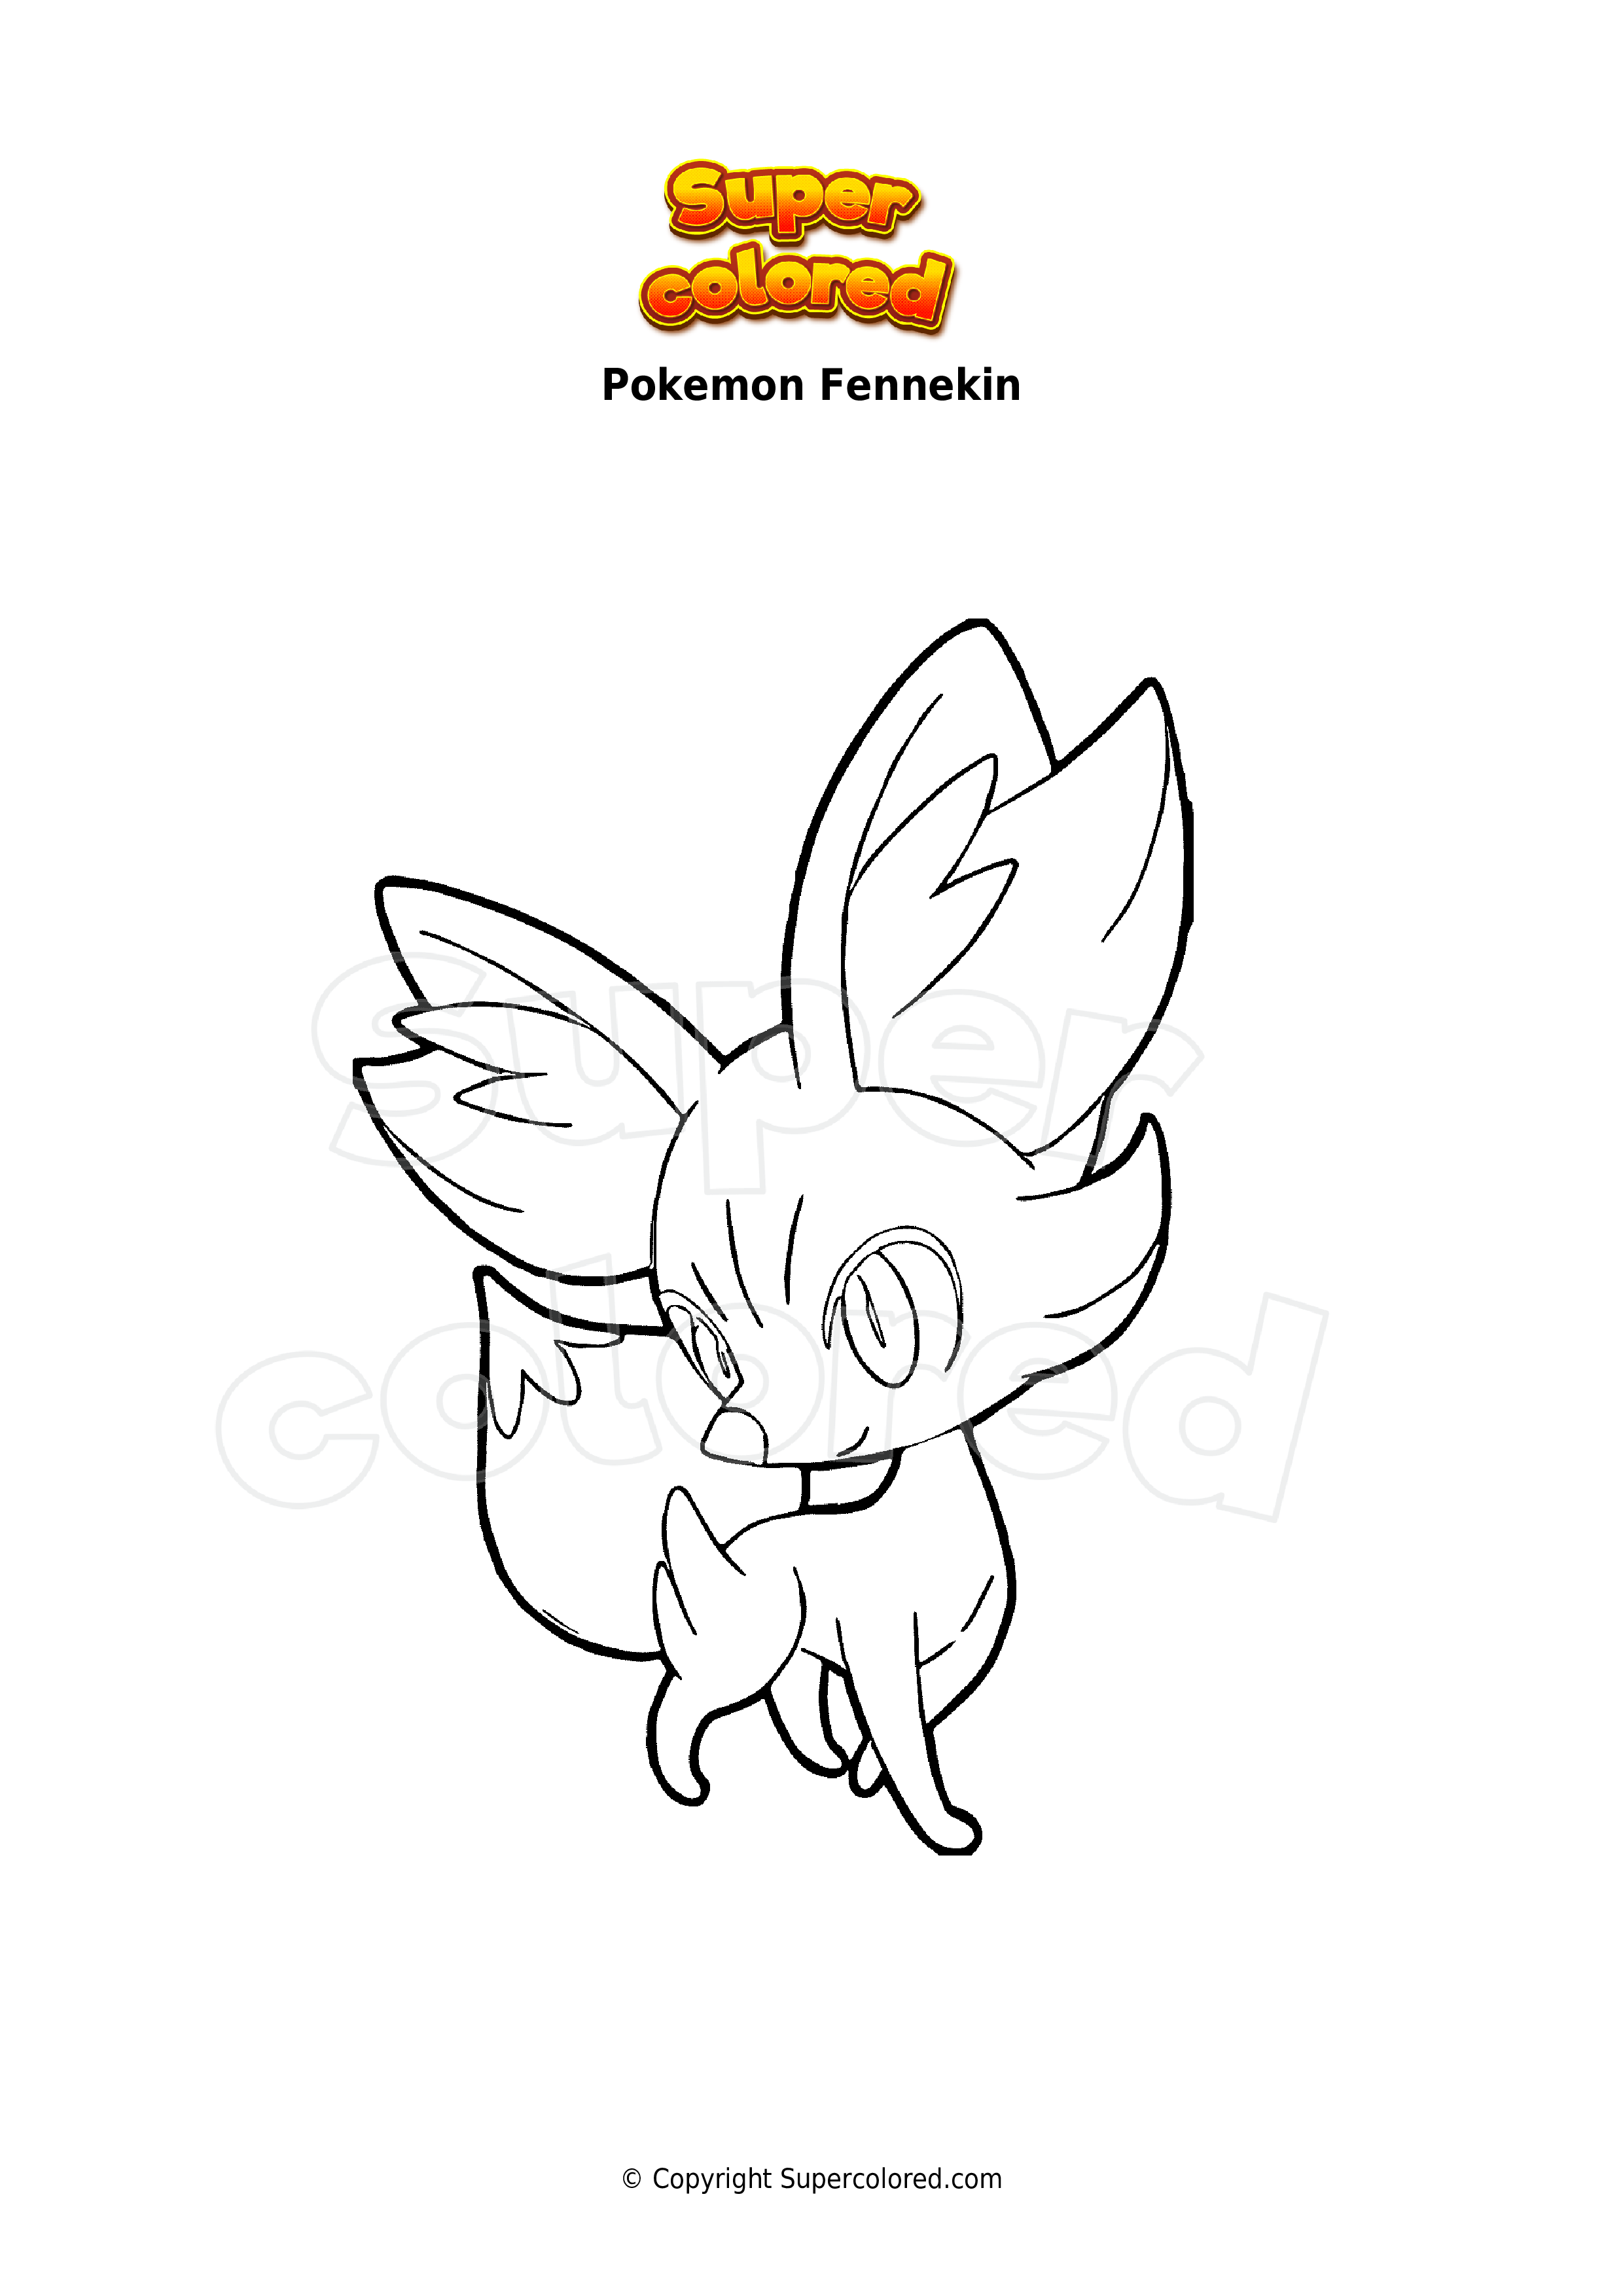 Fern Kawaii to color (Lineart) by PoccnnIndustries on DeviantArt